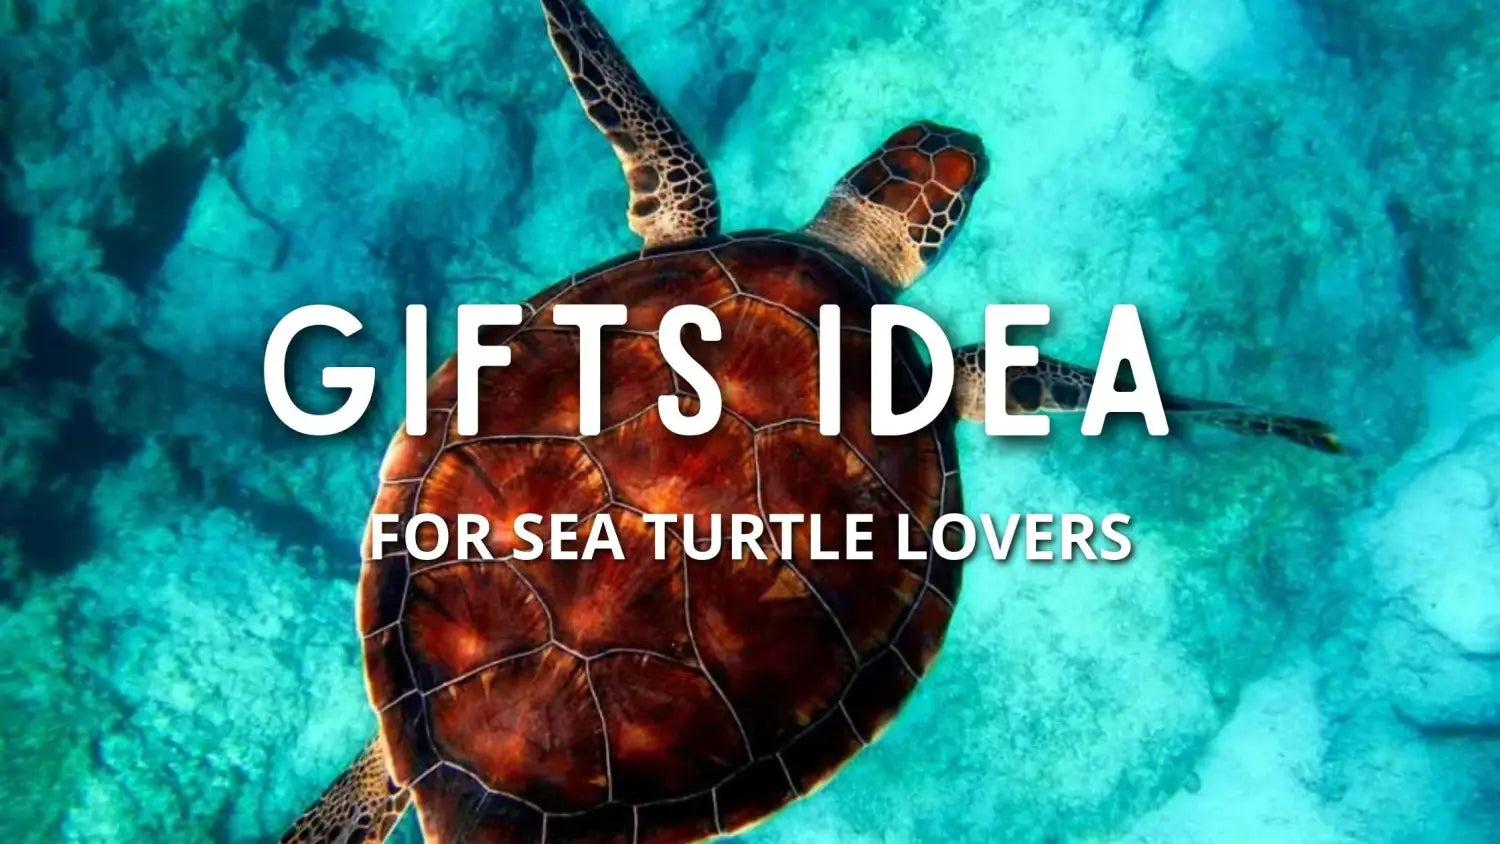 Gifts idea  for Sea Turtle Lovers